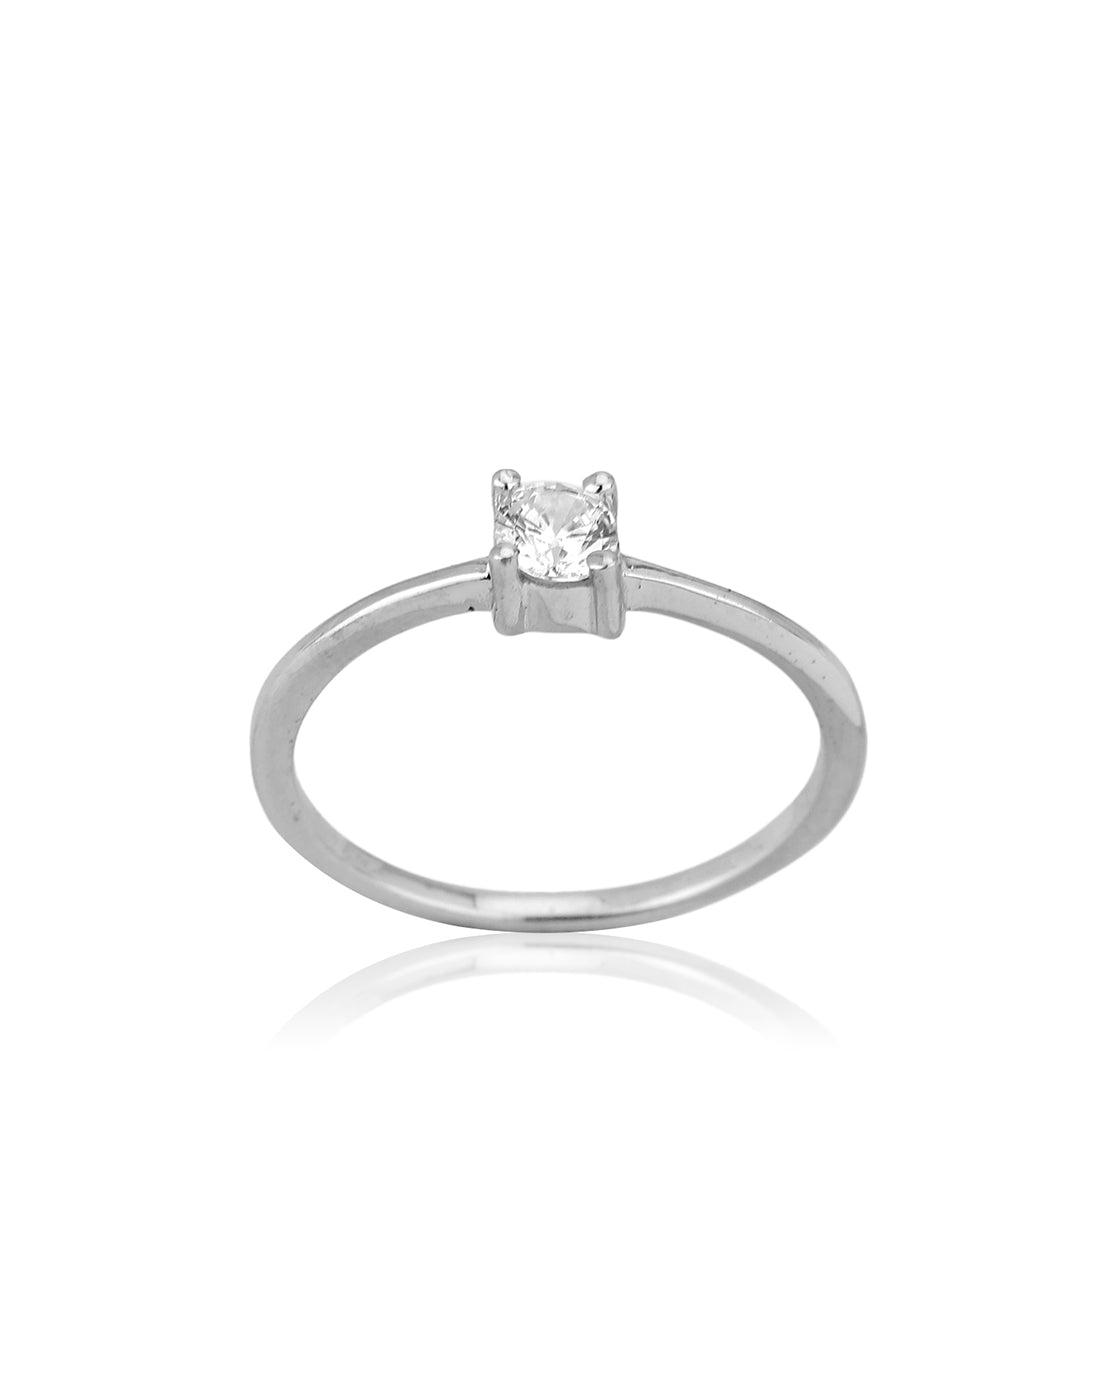 Buy Silver-Toned Rings for Women by Jewels galaxy Online | Ajio.com